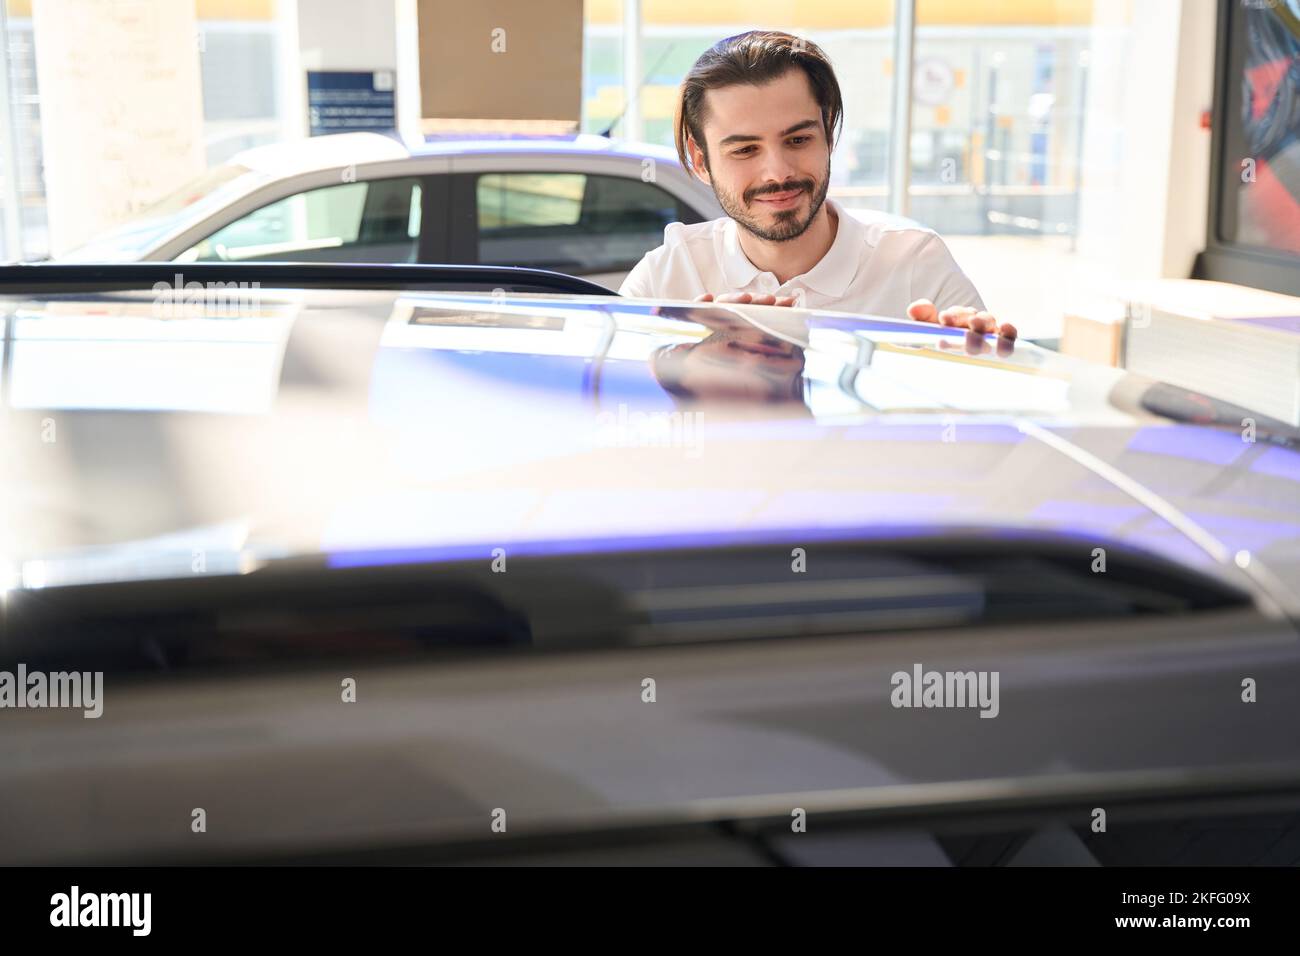 Smiling young potential buyer inspecting car exterior Stock Photo